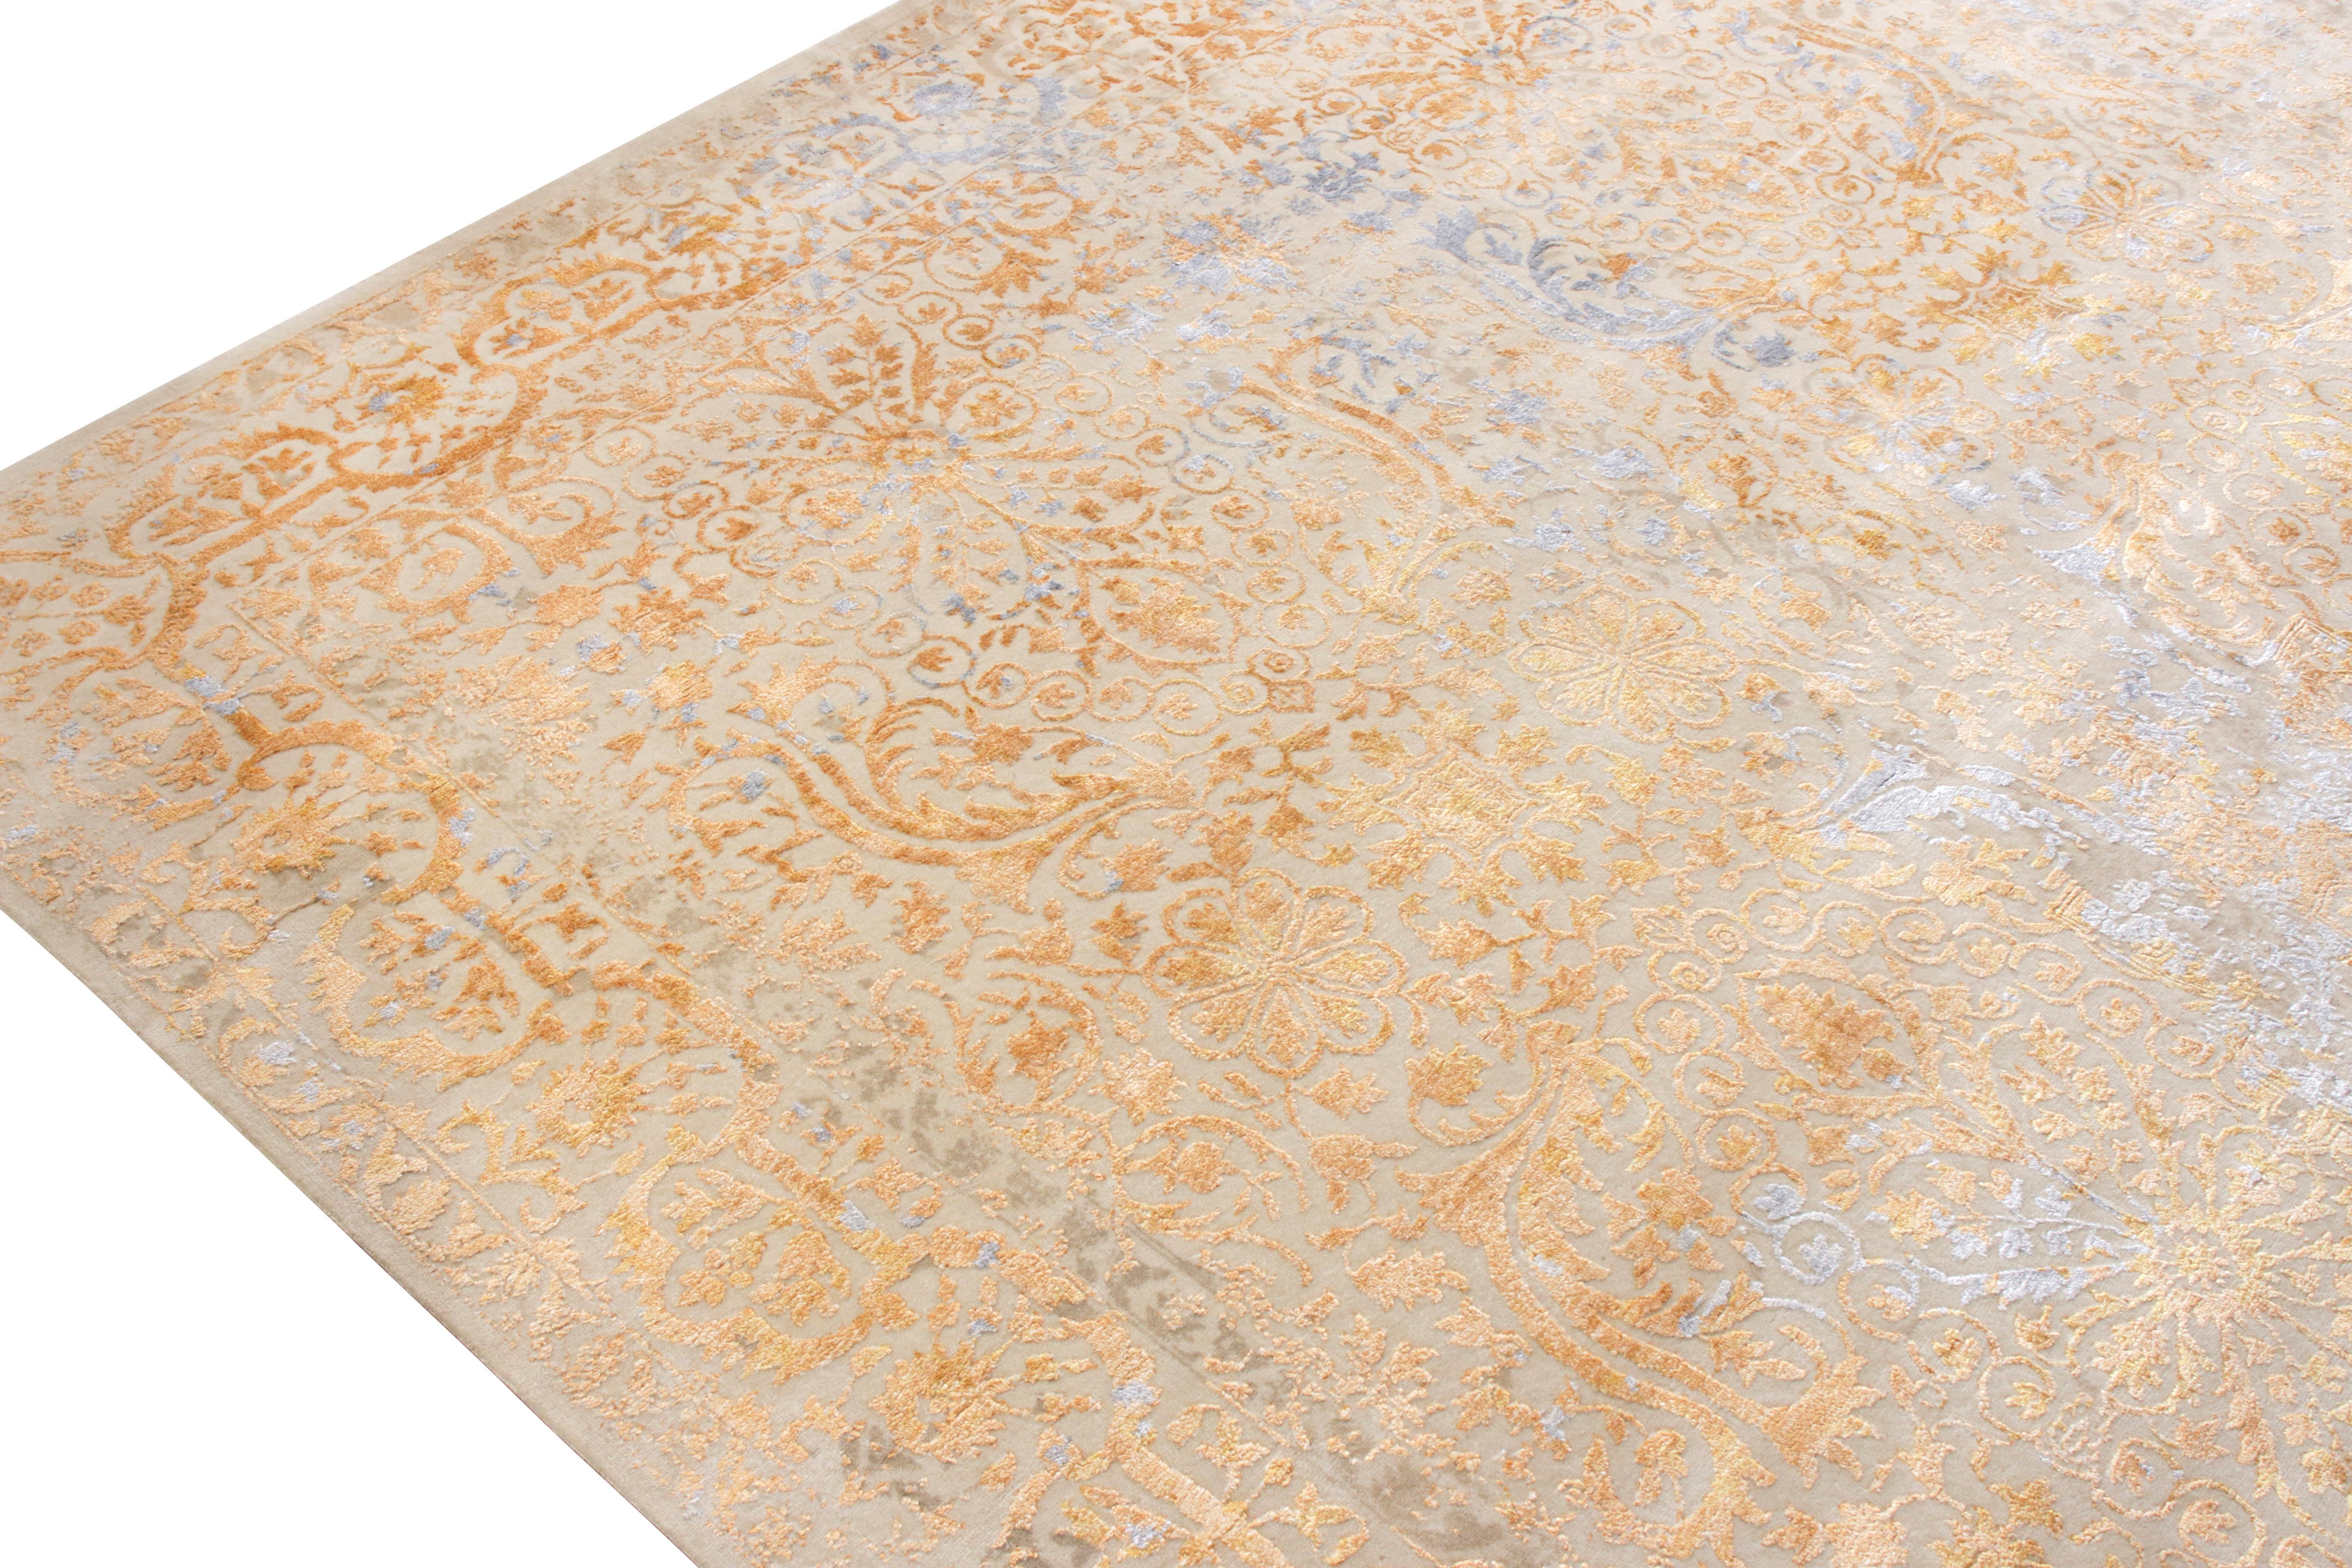 Modern Rug & Kilim's Hand Knotted Classic Style Rug in Beige Orange Floral Pattern